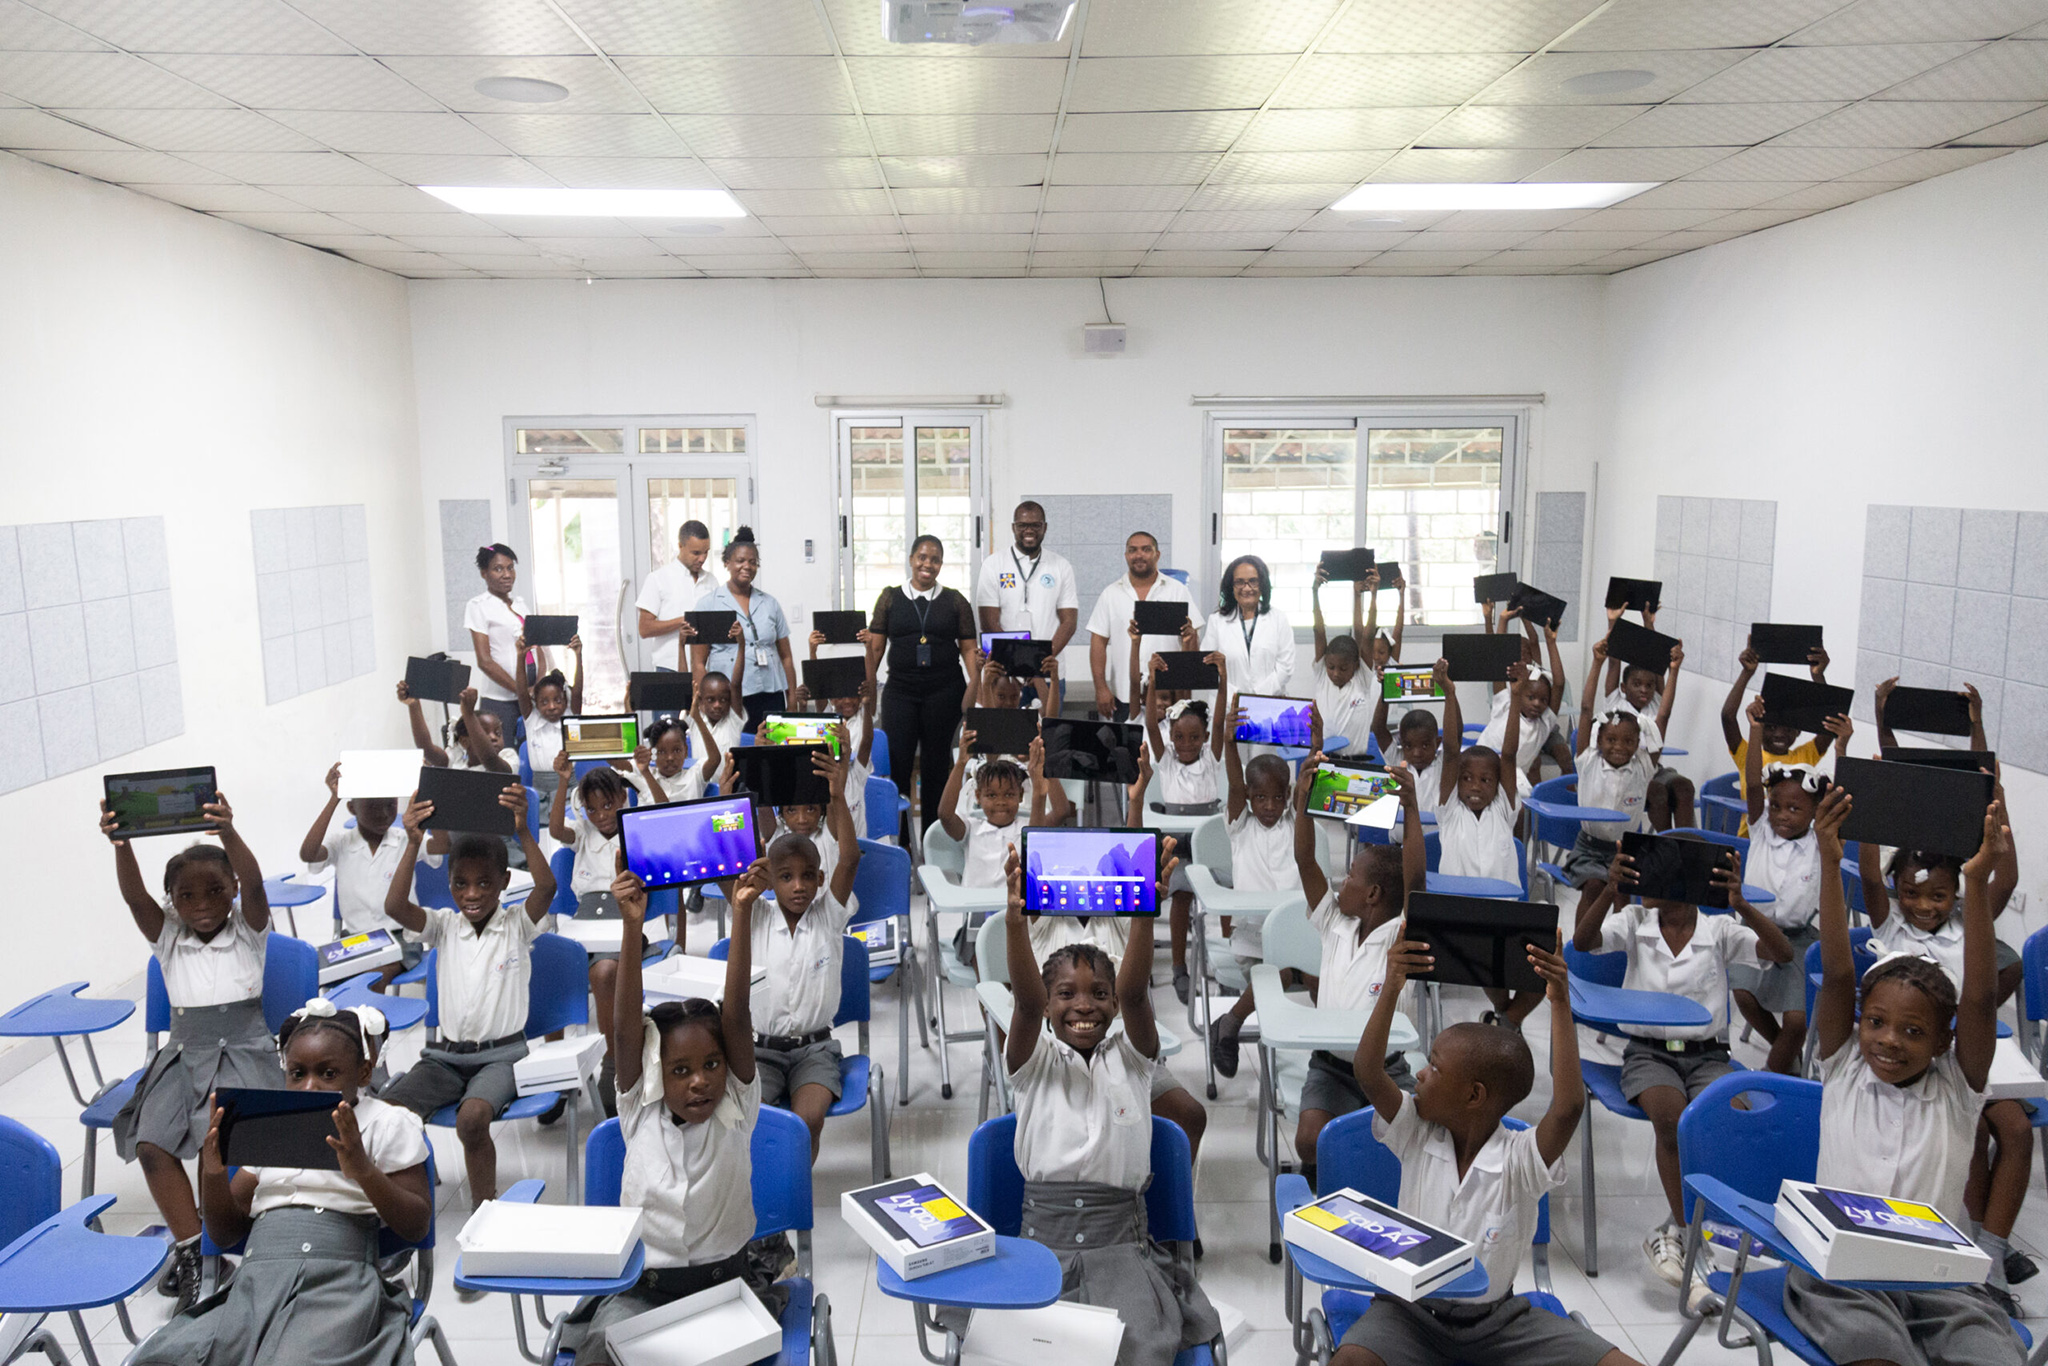 Dr. Deschamps and staff of the civic group GHESKIO join pupils who celebrate receiving tablet computers for their studies. Such Haitian civil society groups are strong partners with international peacebuilding efforts. (Haitian Global Health Alliance)